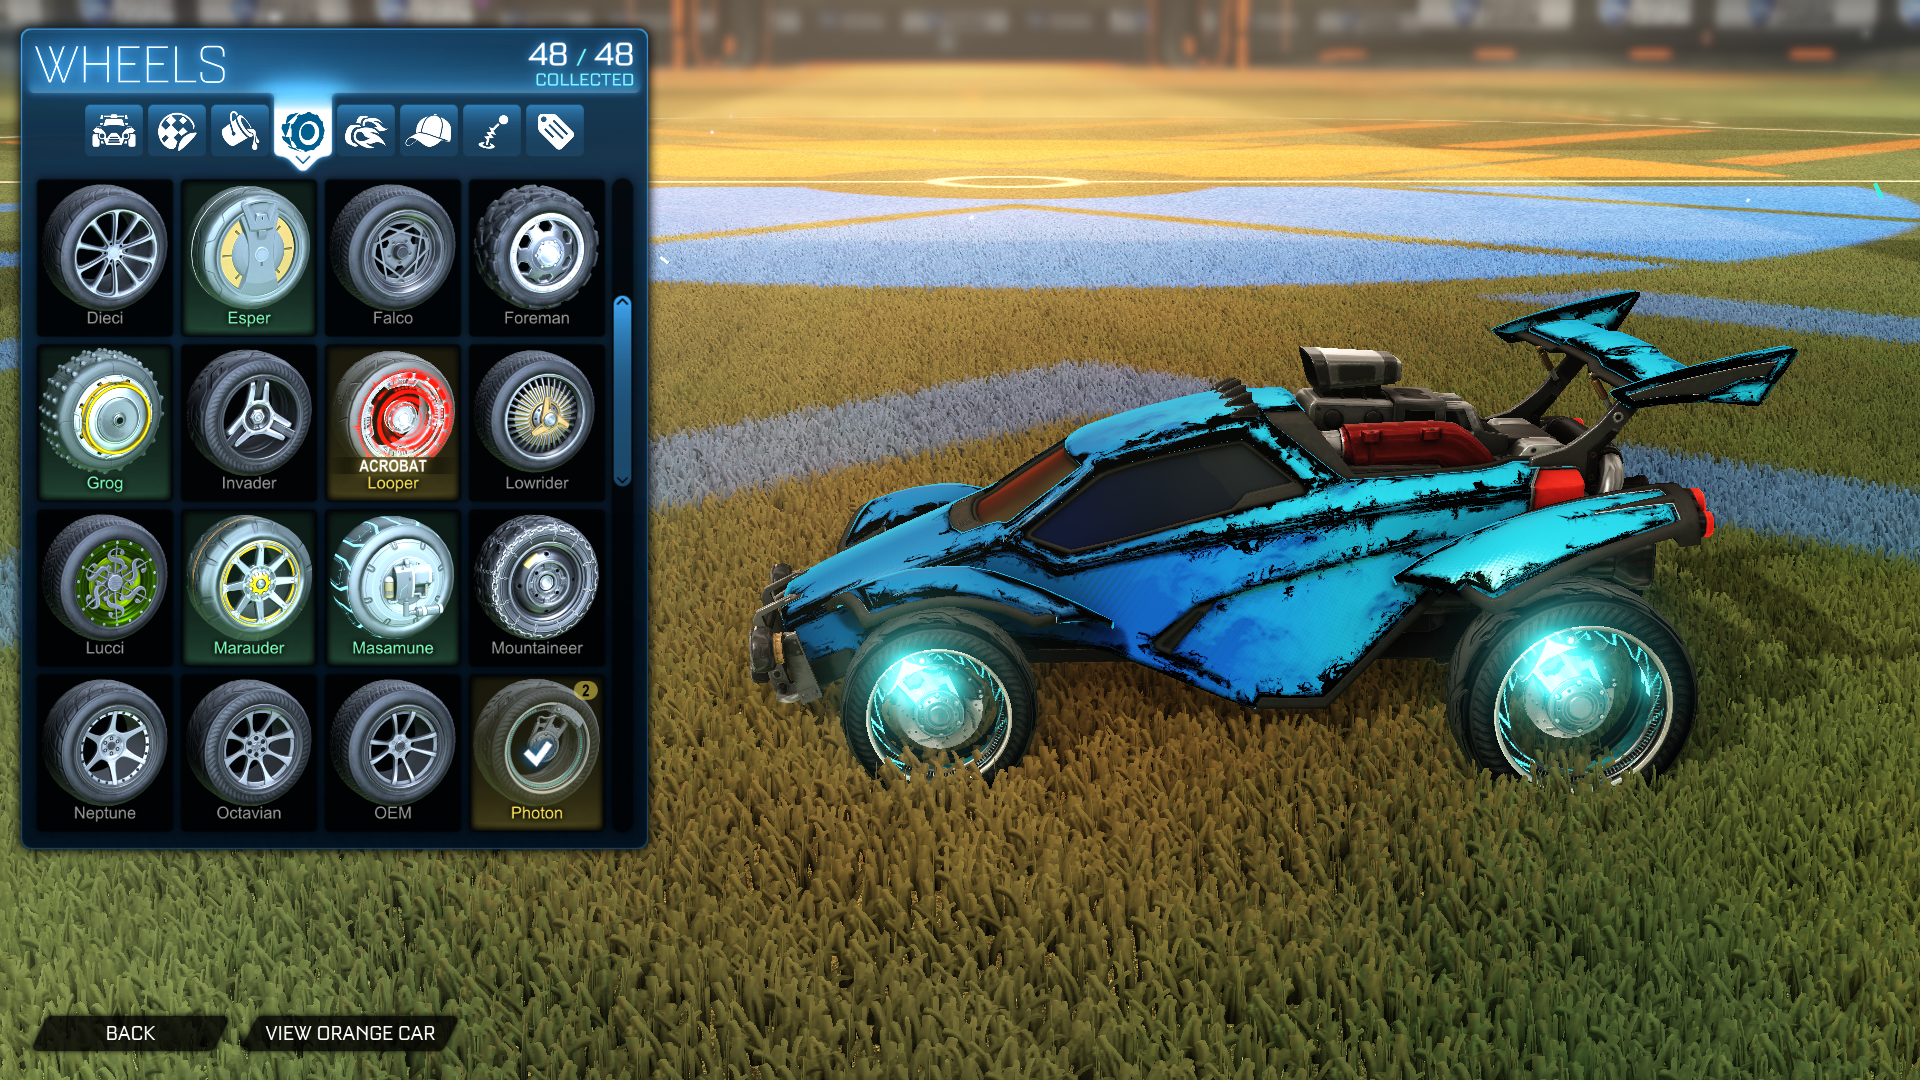 Photons 2.0 (Works on Painted aswell)